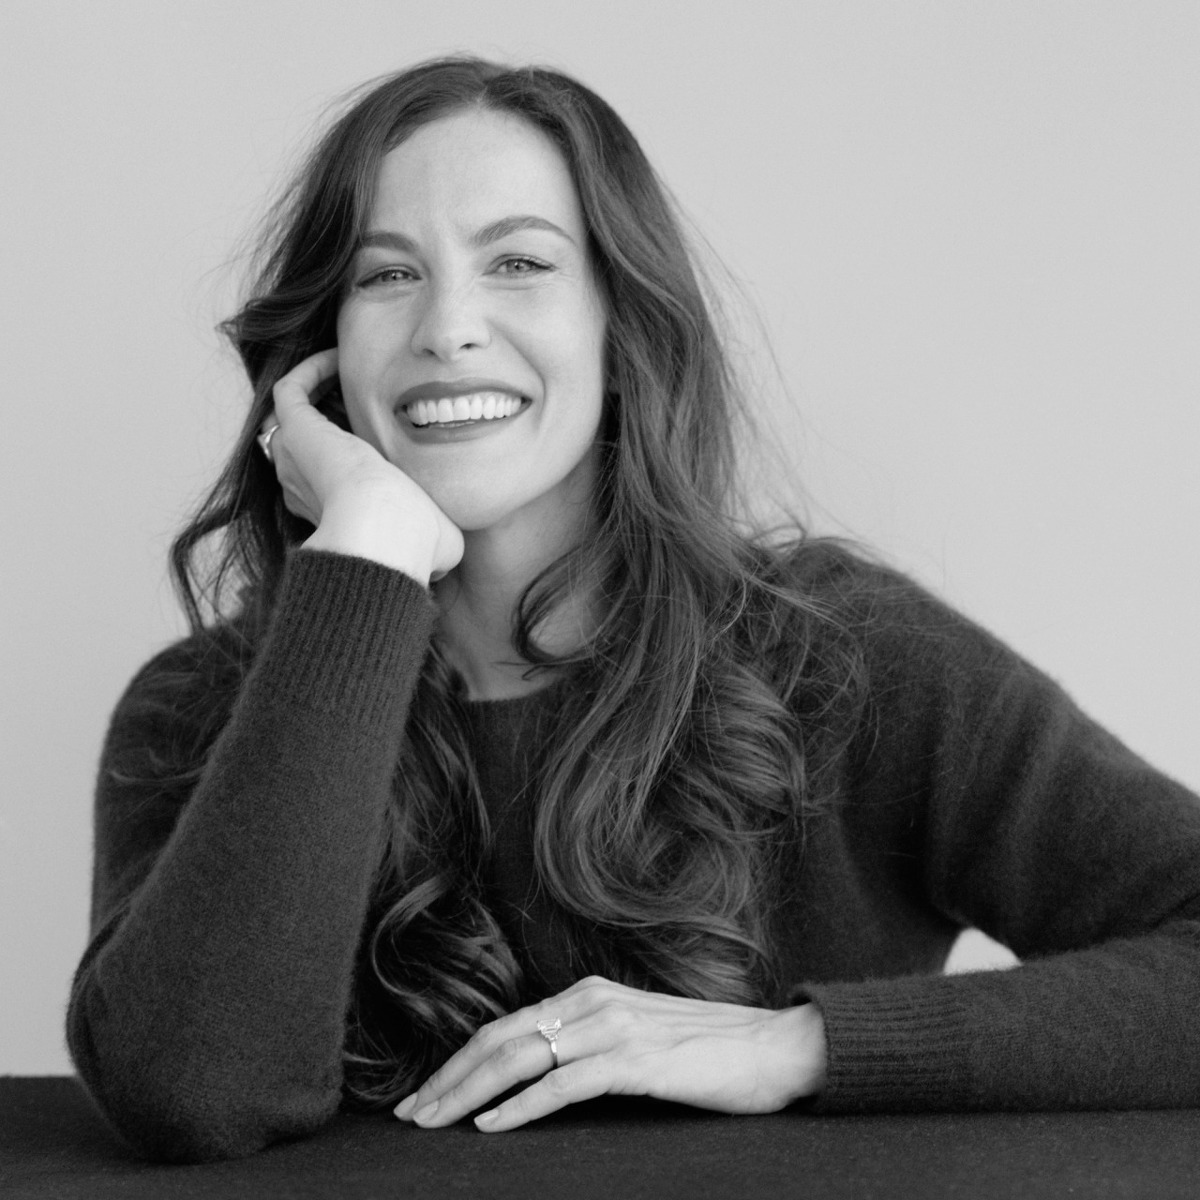 Liv Tyler photo 784 of 974 pics, wallpaper - photo #934547 - ThePlace2